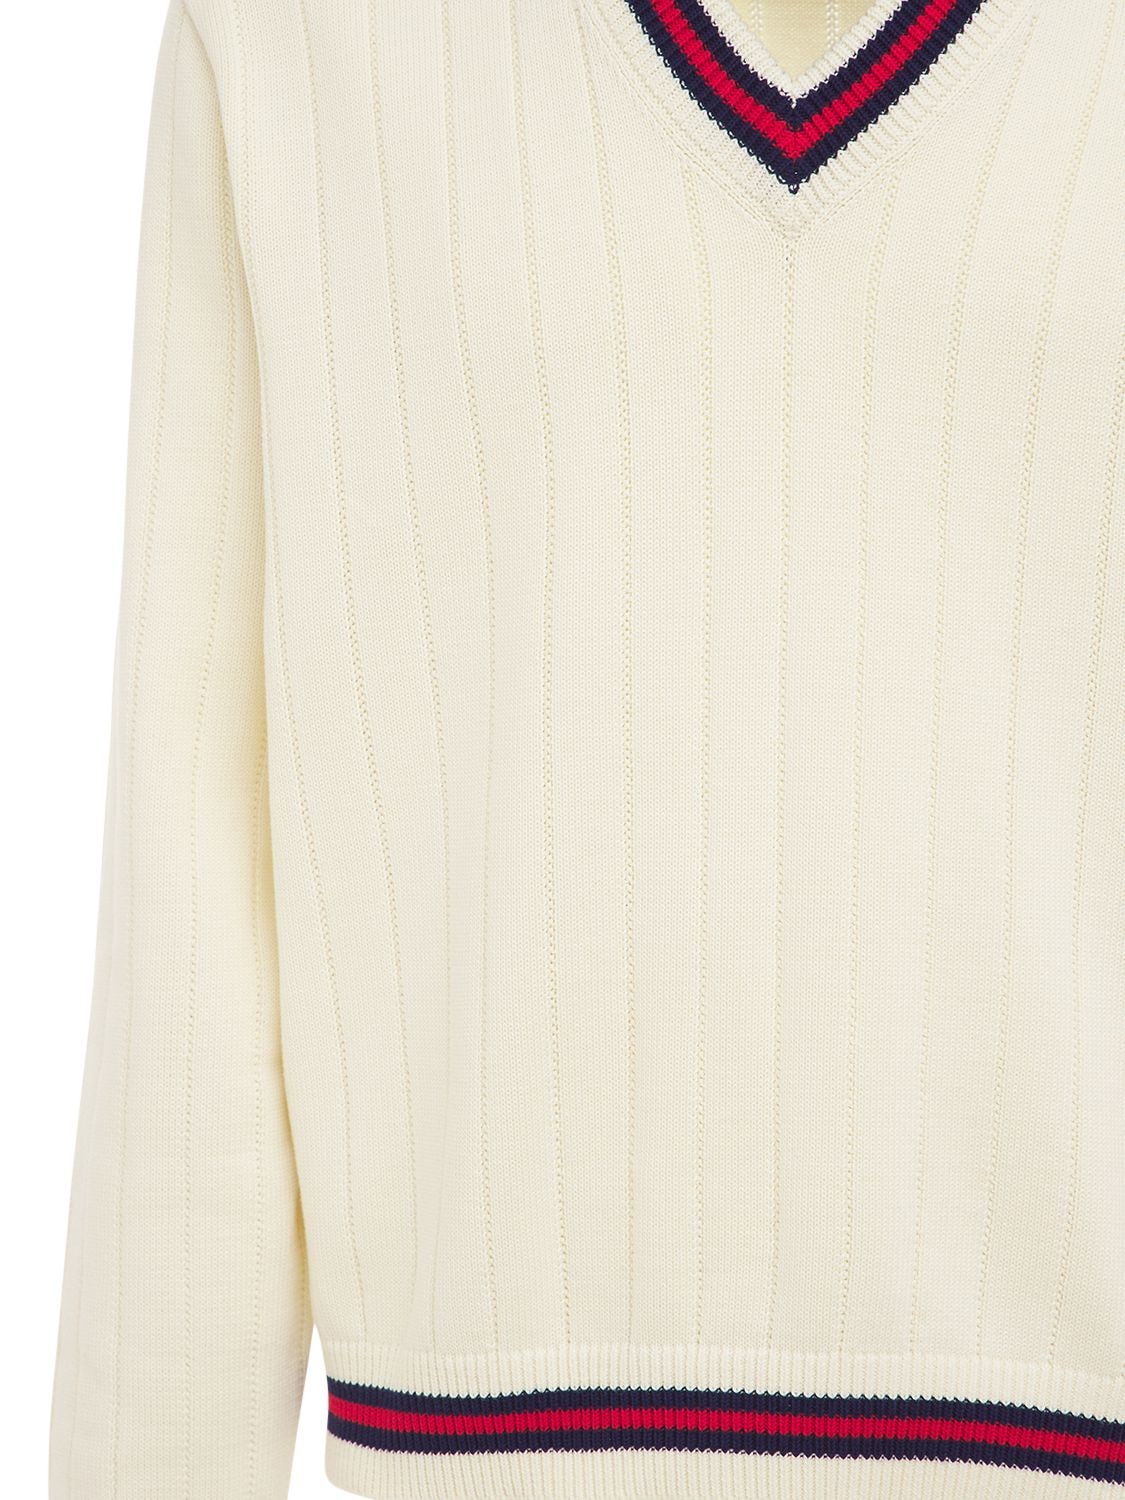 Shop Gucci Cotton Knit V Neck Sweater W/ Web In Ivory